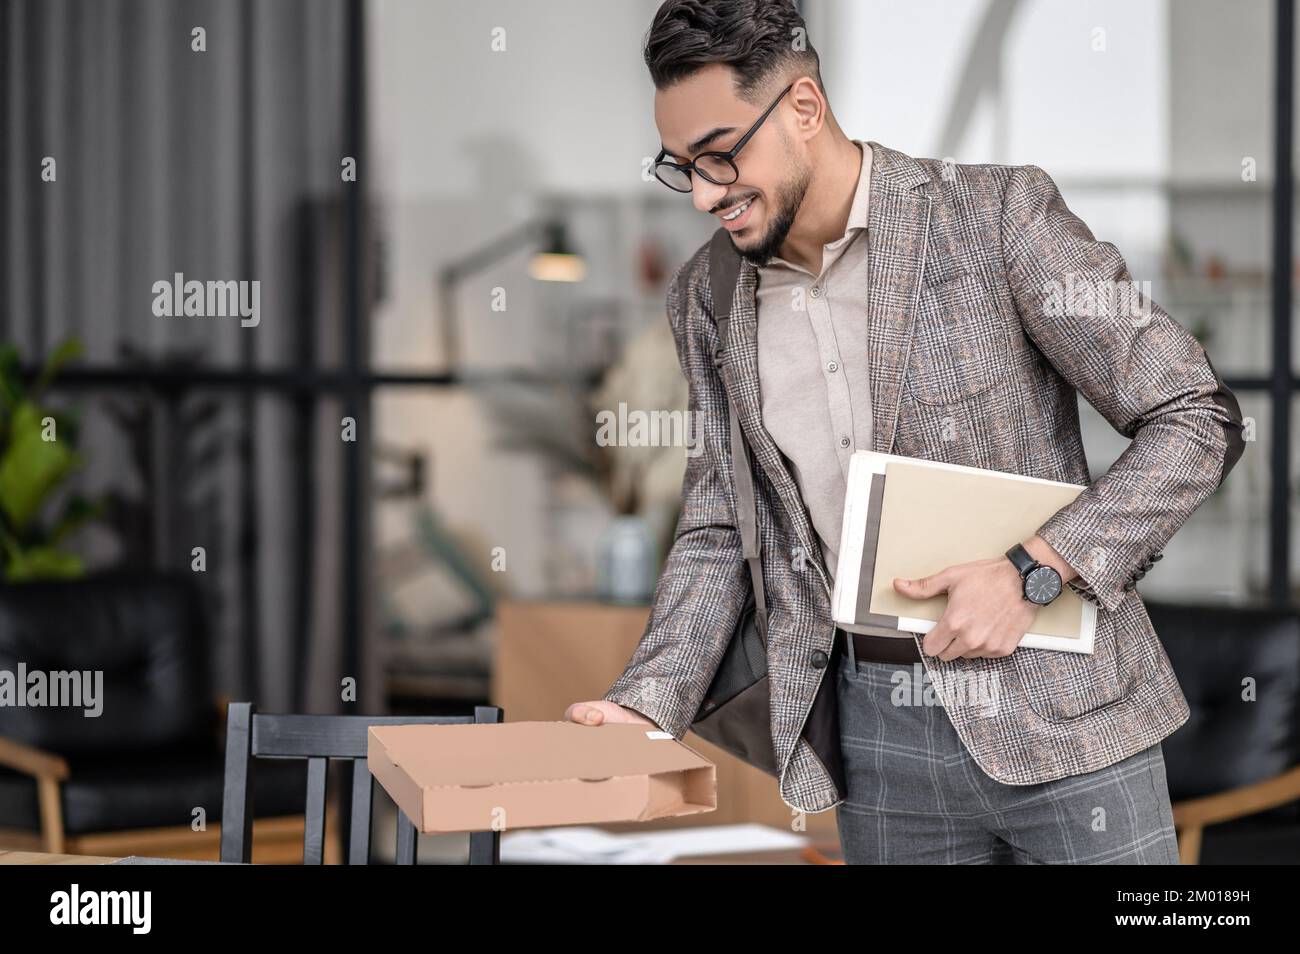 Anticipation. Smiling young bearded man in glasses looking at box in hand holding periodicals standing sideways to camera indoors. Stock Photo